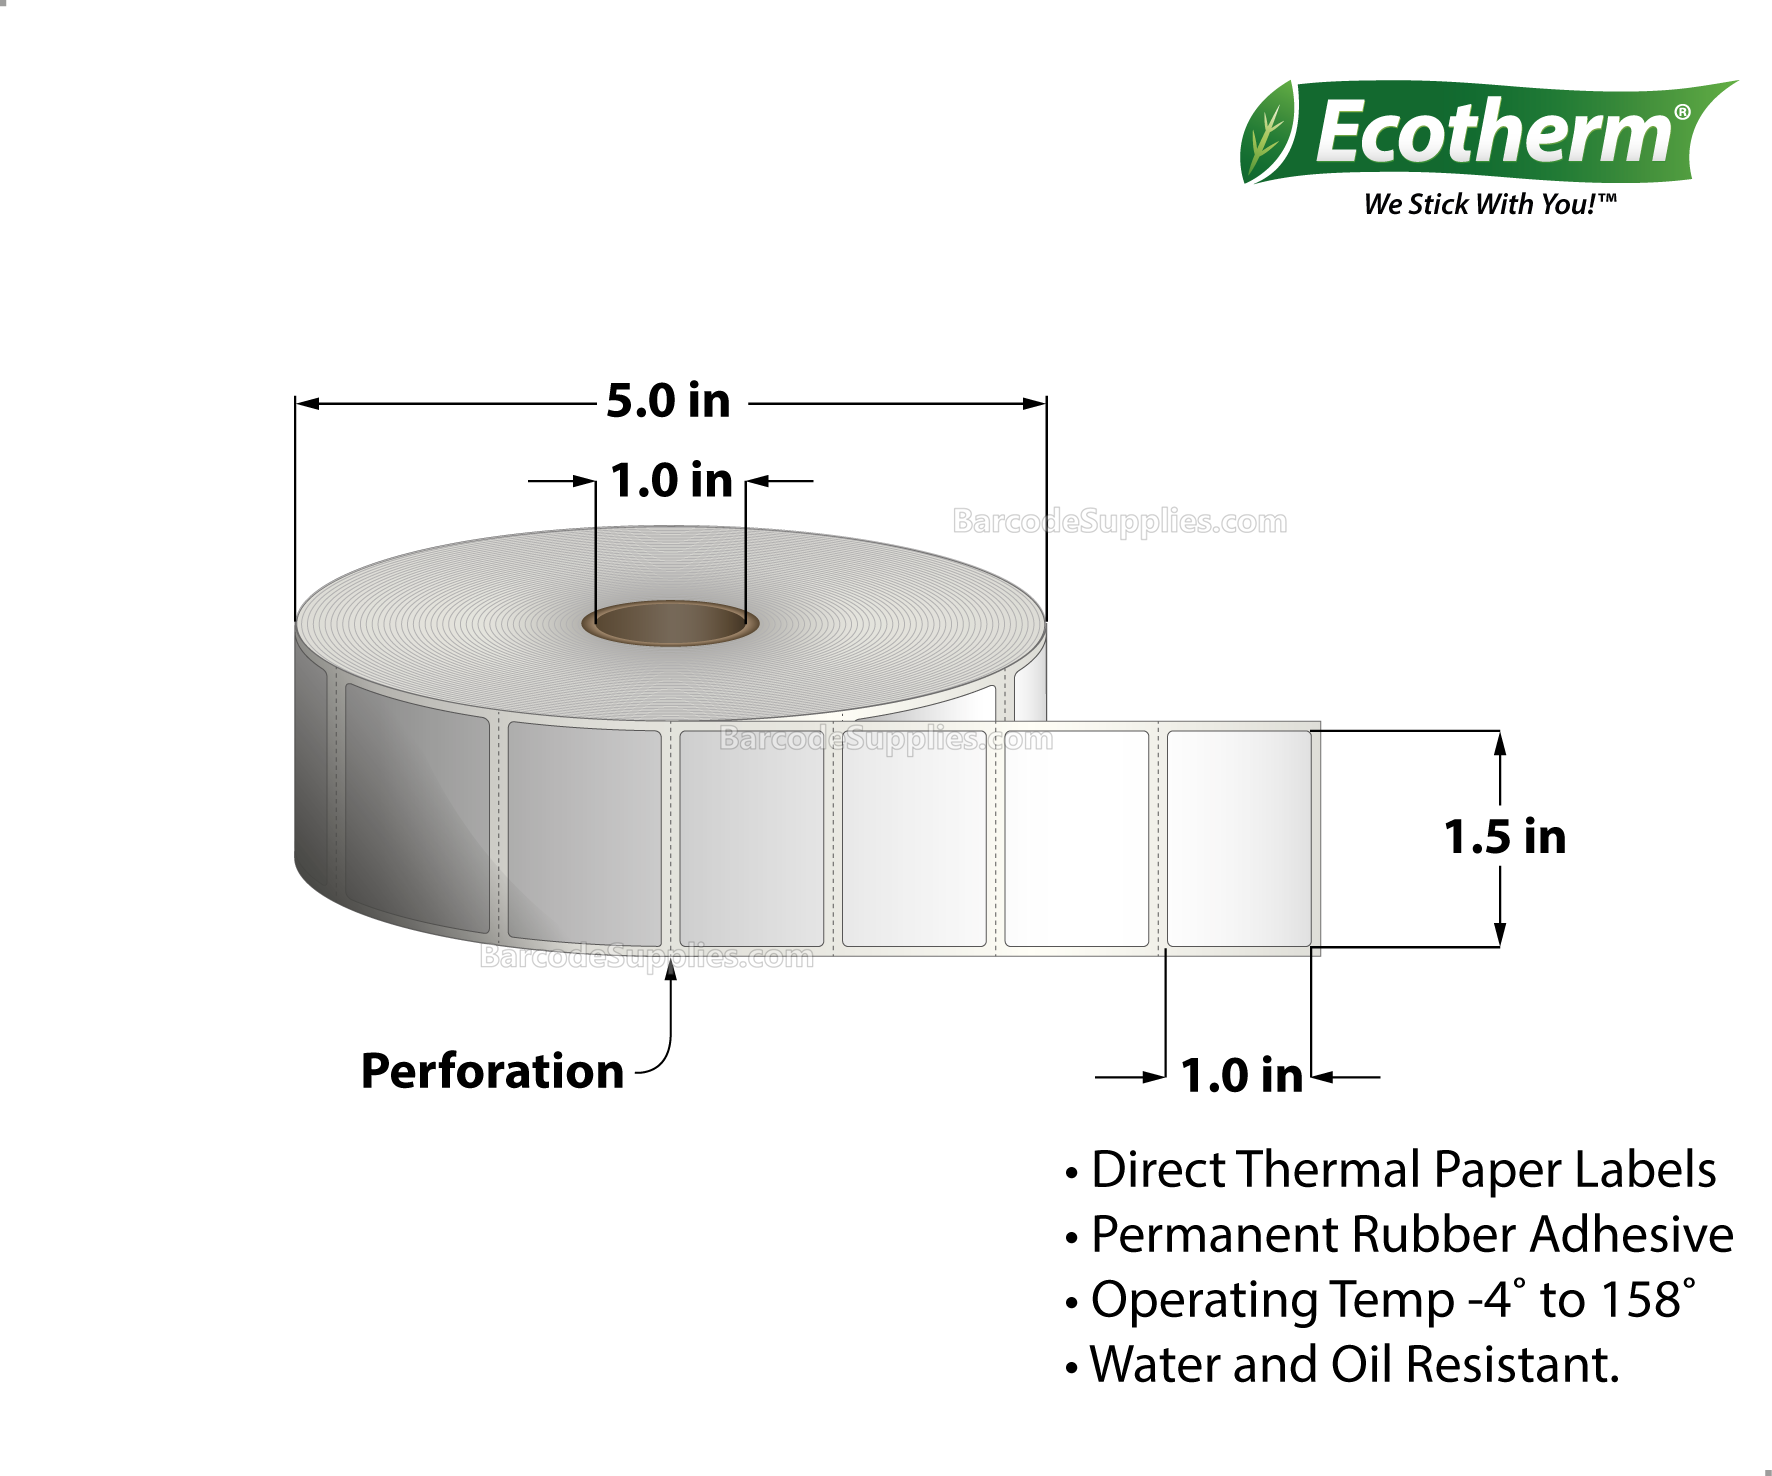 Products 1.5 x 1 Direct Thermal White Labels With Rubber Adhesive - Perforated - 1325 Labels Per Roll - Carton Of 6 Rolls - 11400 Labels Total - MPN: ECOTHERM15158-6